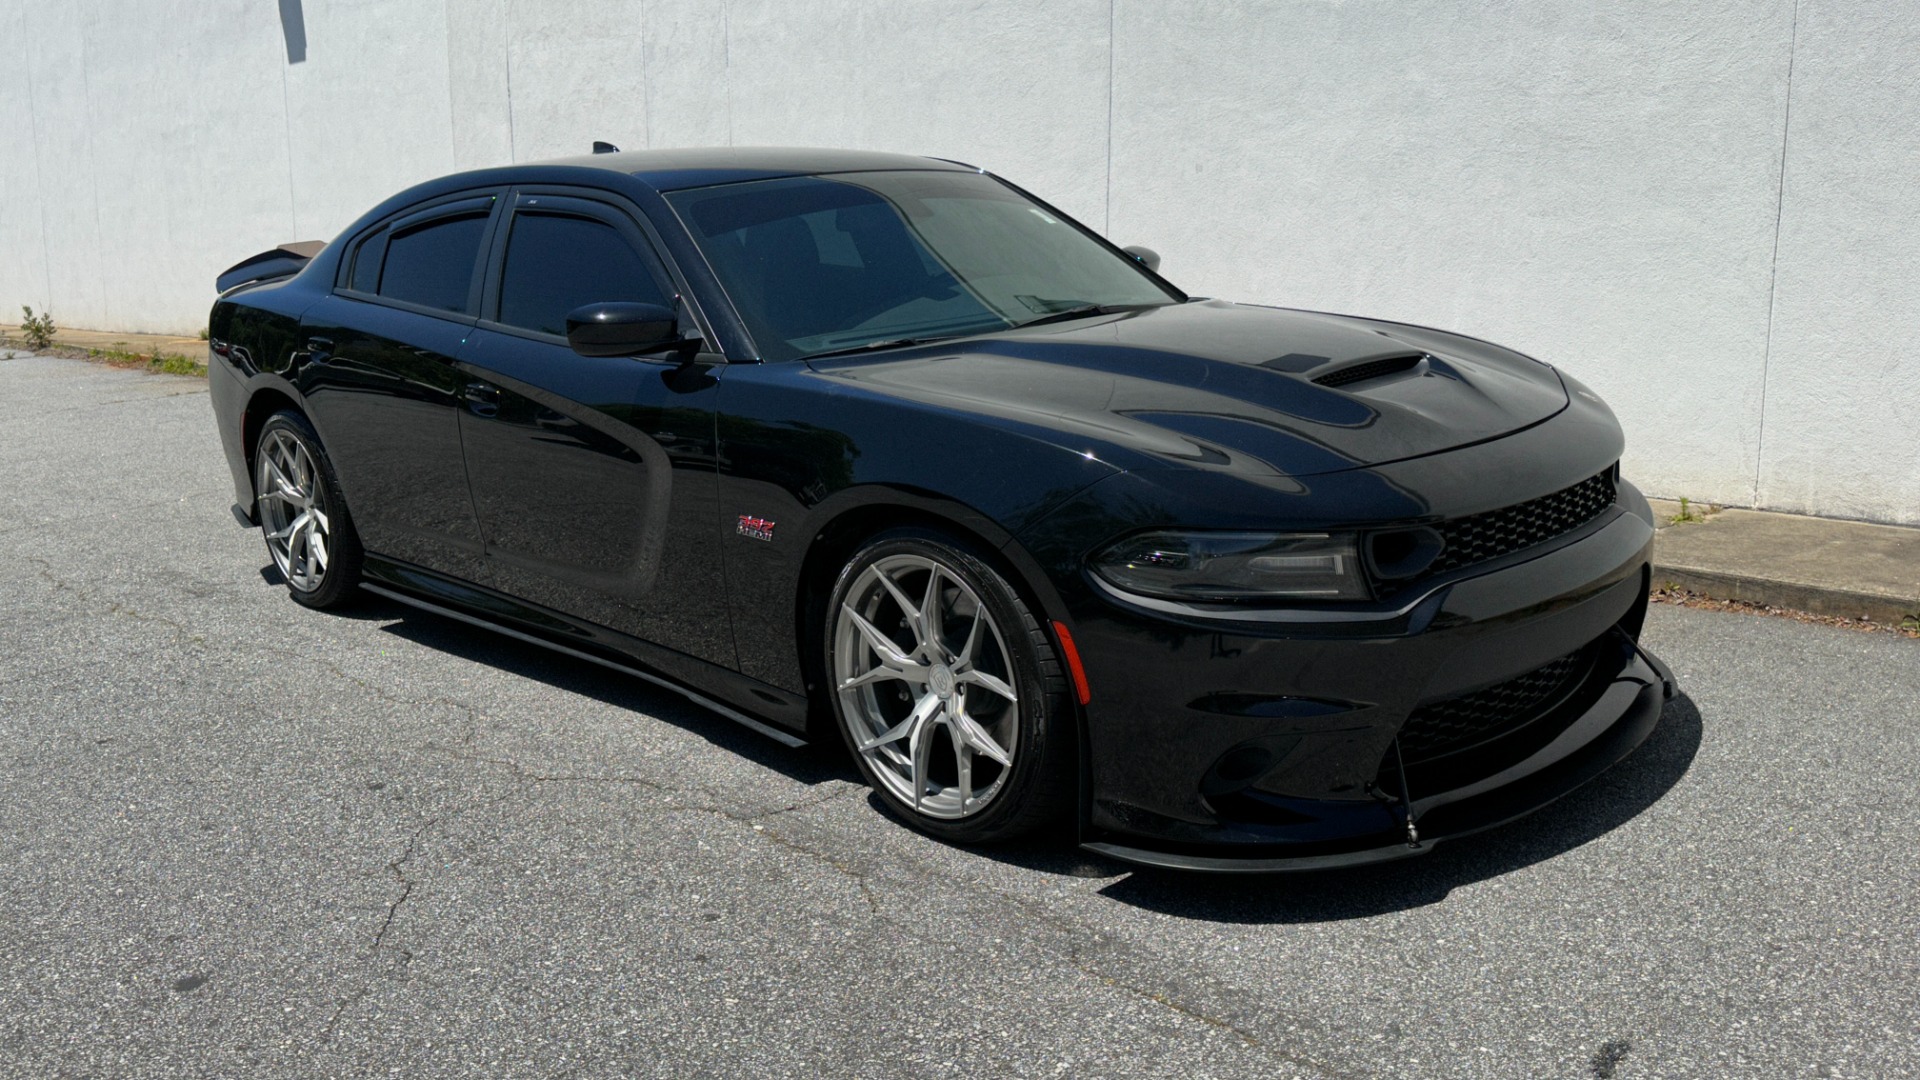 Used 2020 Dodge Charger SCAT PACK / UPGRADED WHEELS / UPGRADED AERO / CLOTH INTERIOR for sale Sold at Formula Imports in Charlotte NC 28227 2